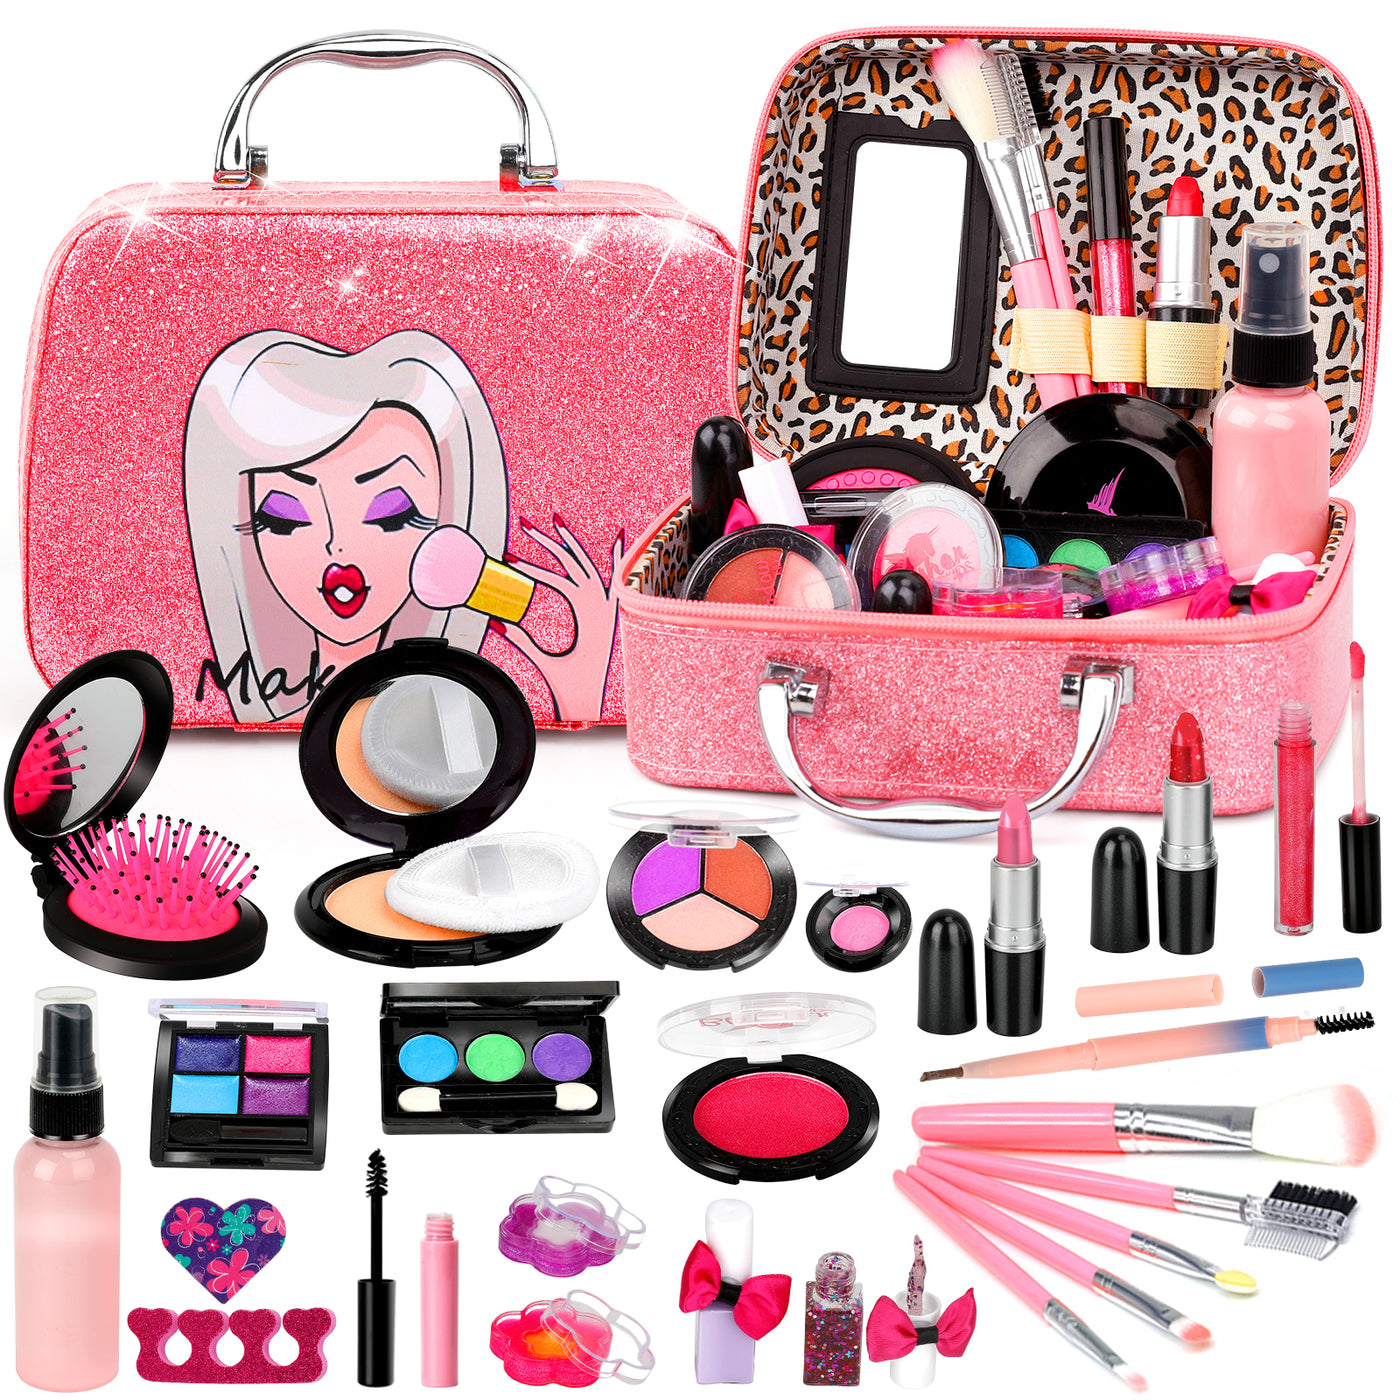 Gifts for 3 4 5 6 7 8 Year Old Girls, Girls Makeup Set Toys for Girls Aged  5-8, 41 Packs Washable Kids Makeup Kit Girls Costume Party Toys